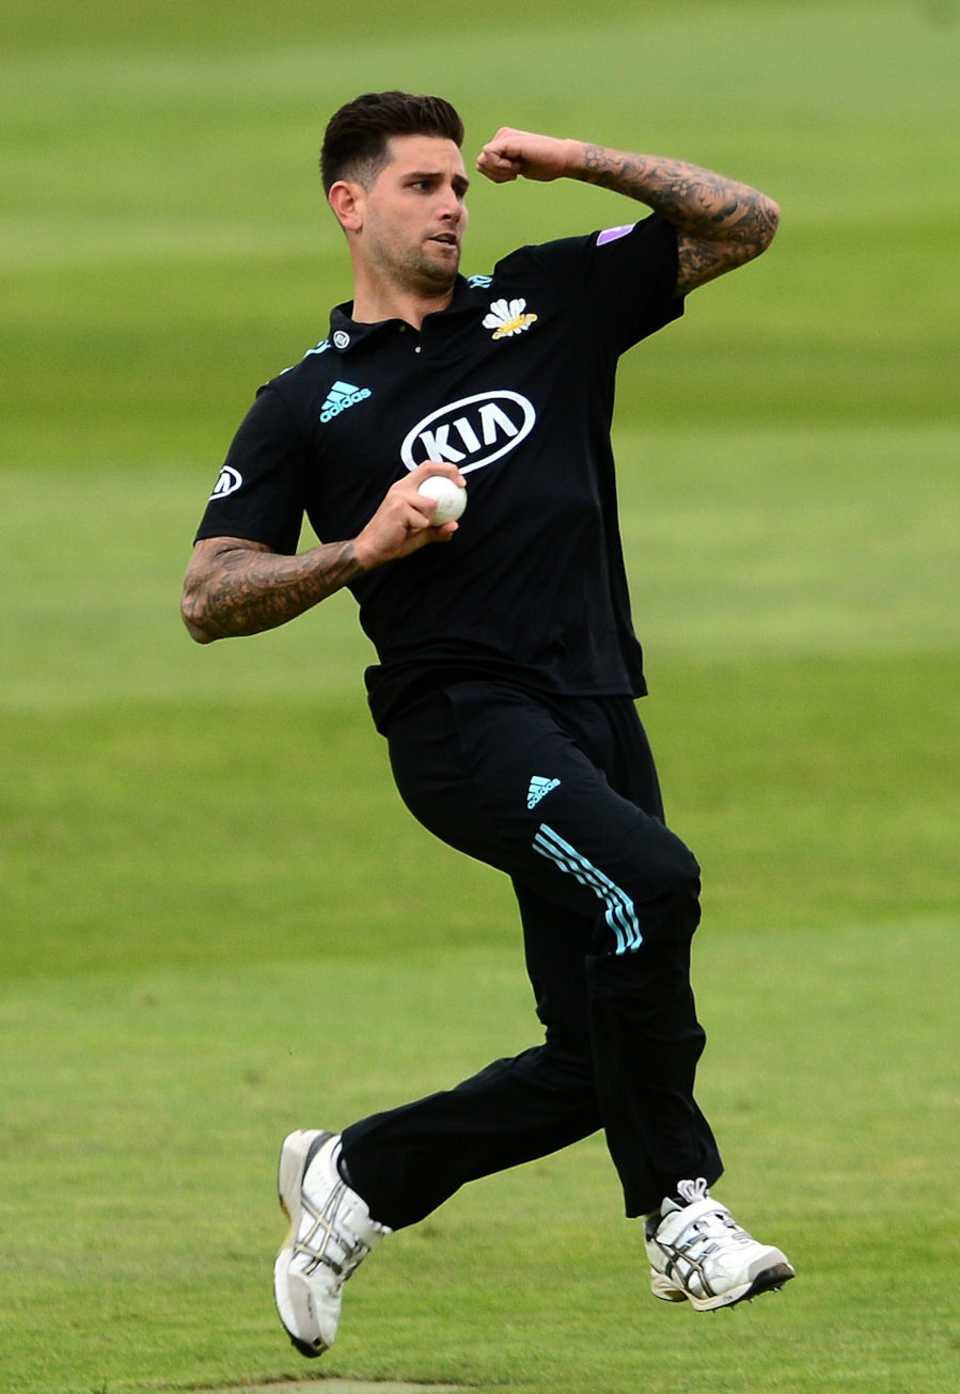 Jade Dernbach was left unrewarded as Somerset recovered from 22 for 5, Somerset v Surrey, Royal London Cup, South Group, Taunton, April 28, 2017